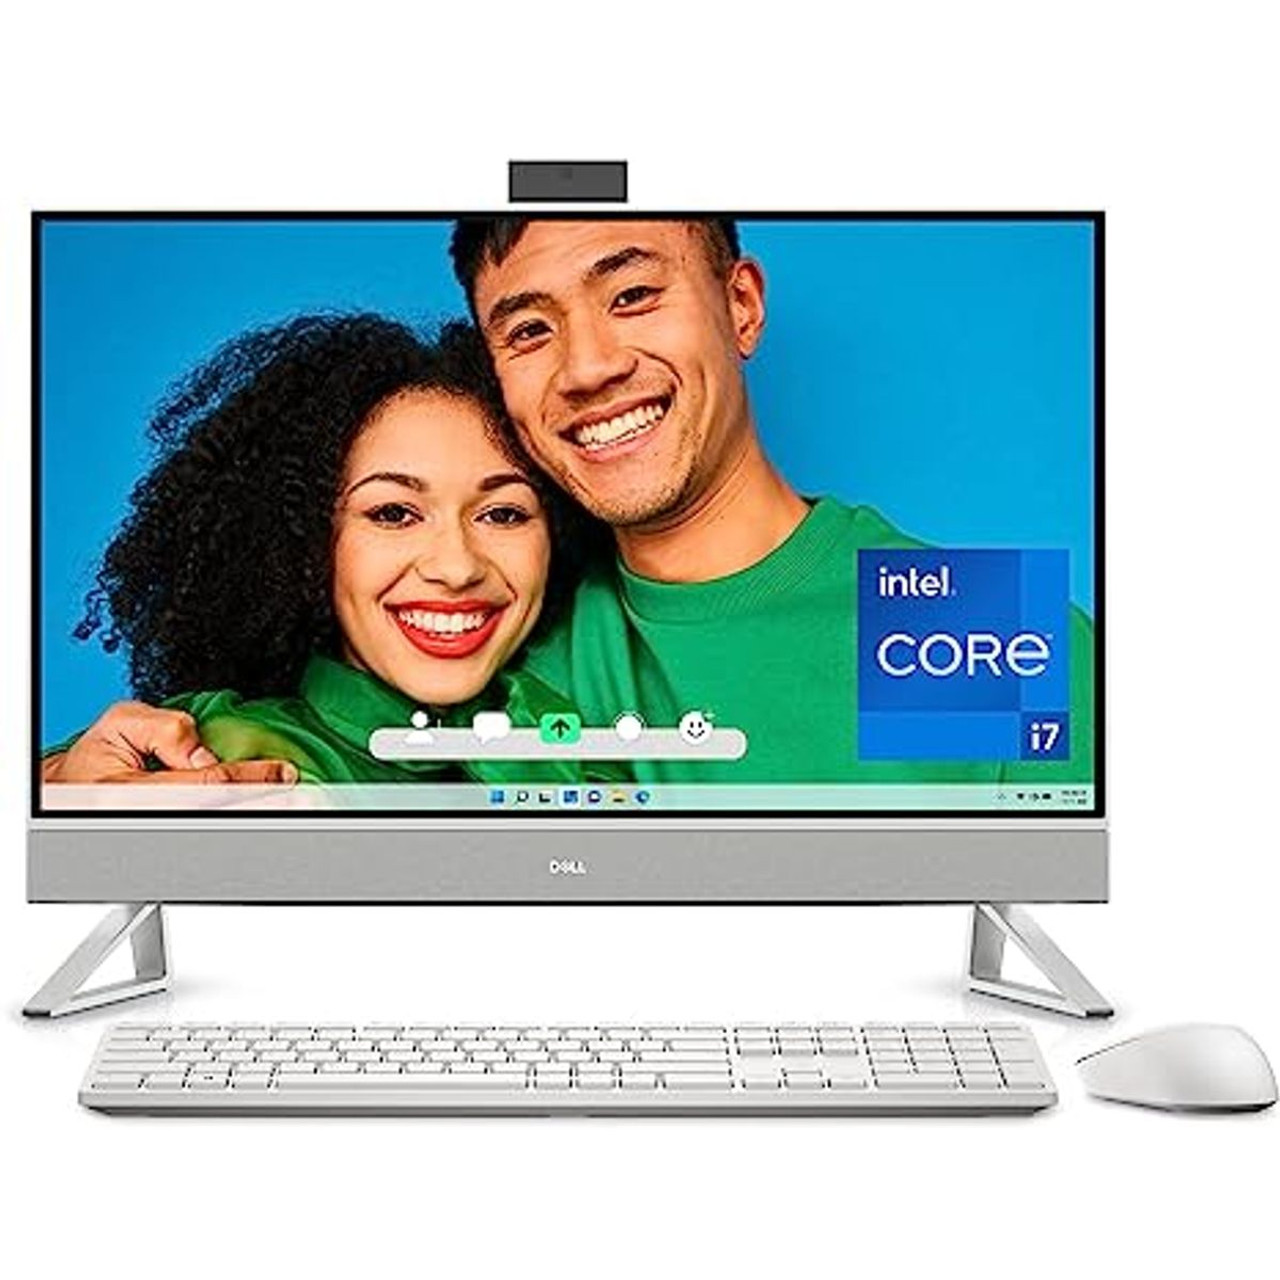 Dell® Inspiron 27 7720 All-in-One Desktop, 32GB RAM, 1TB SSD product image